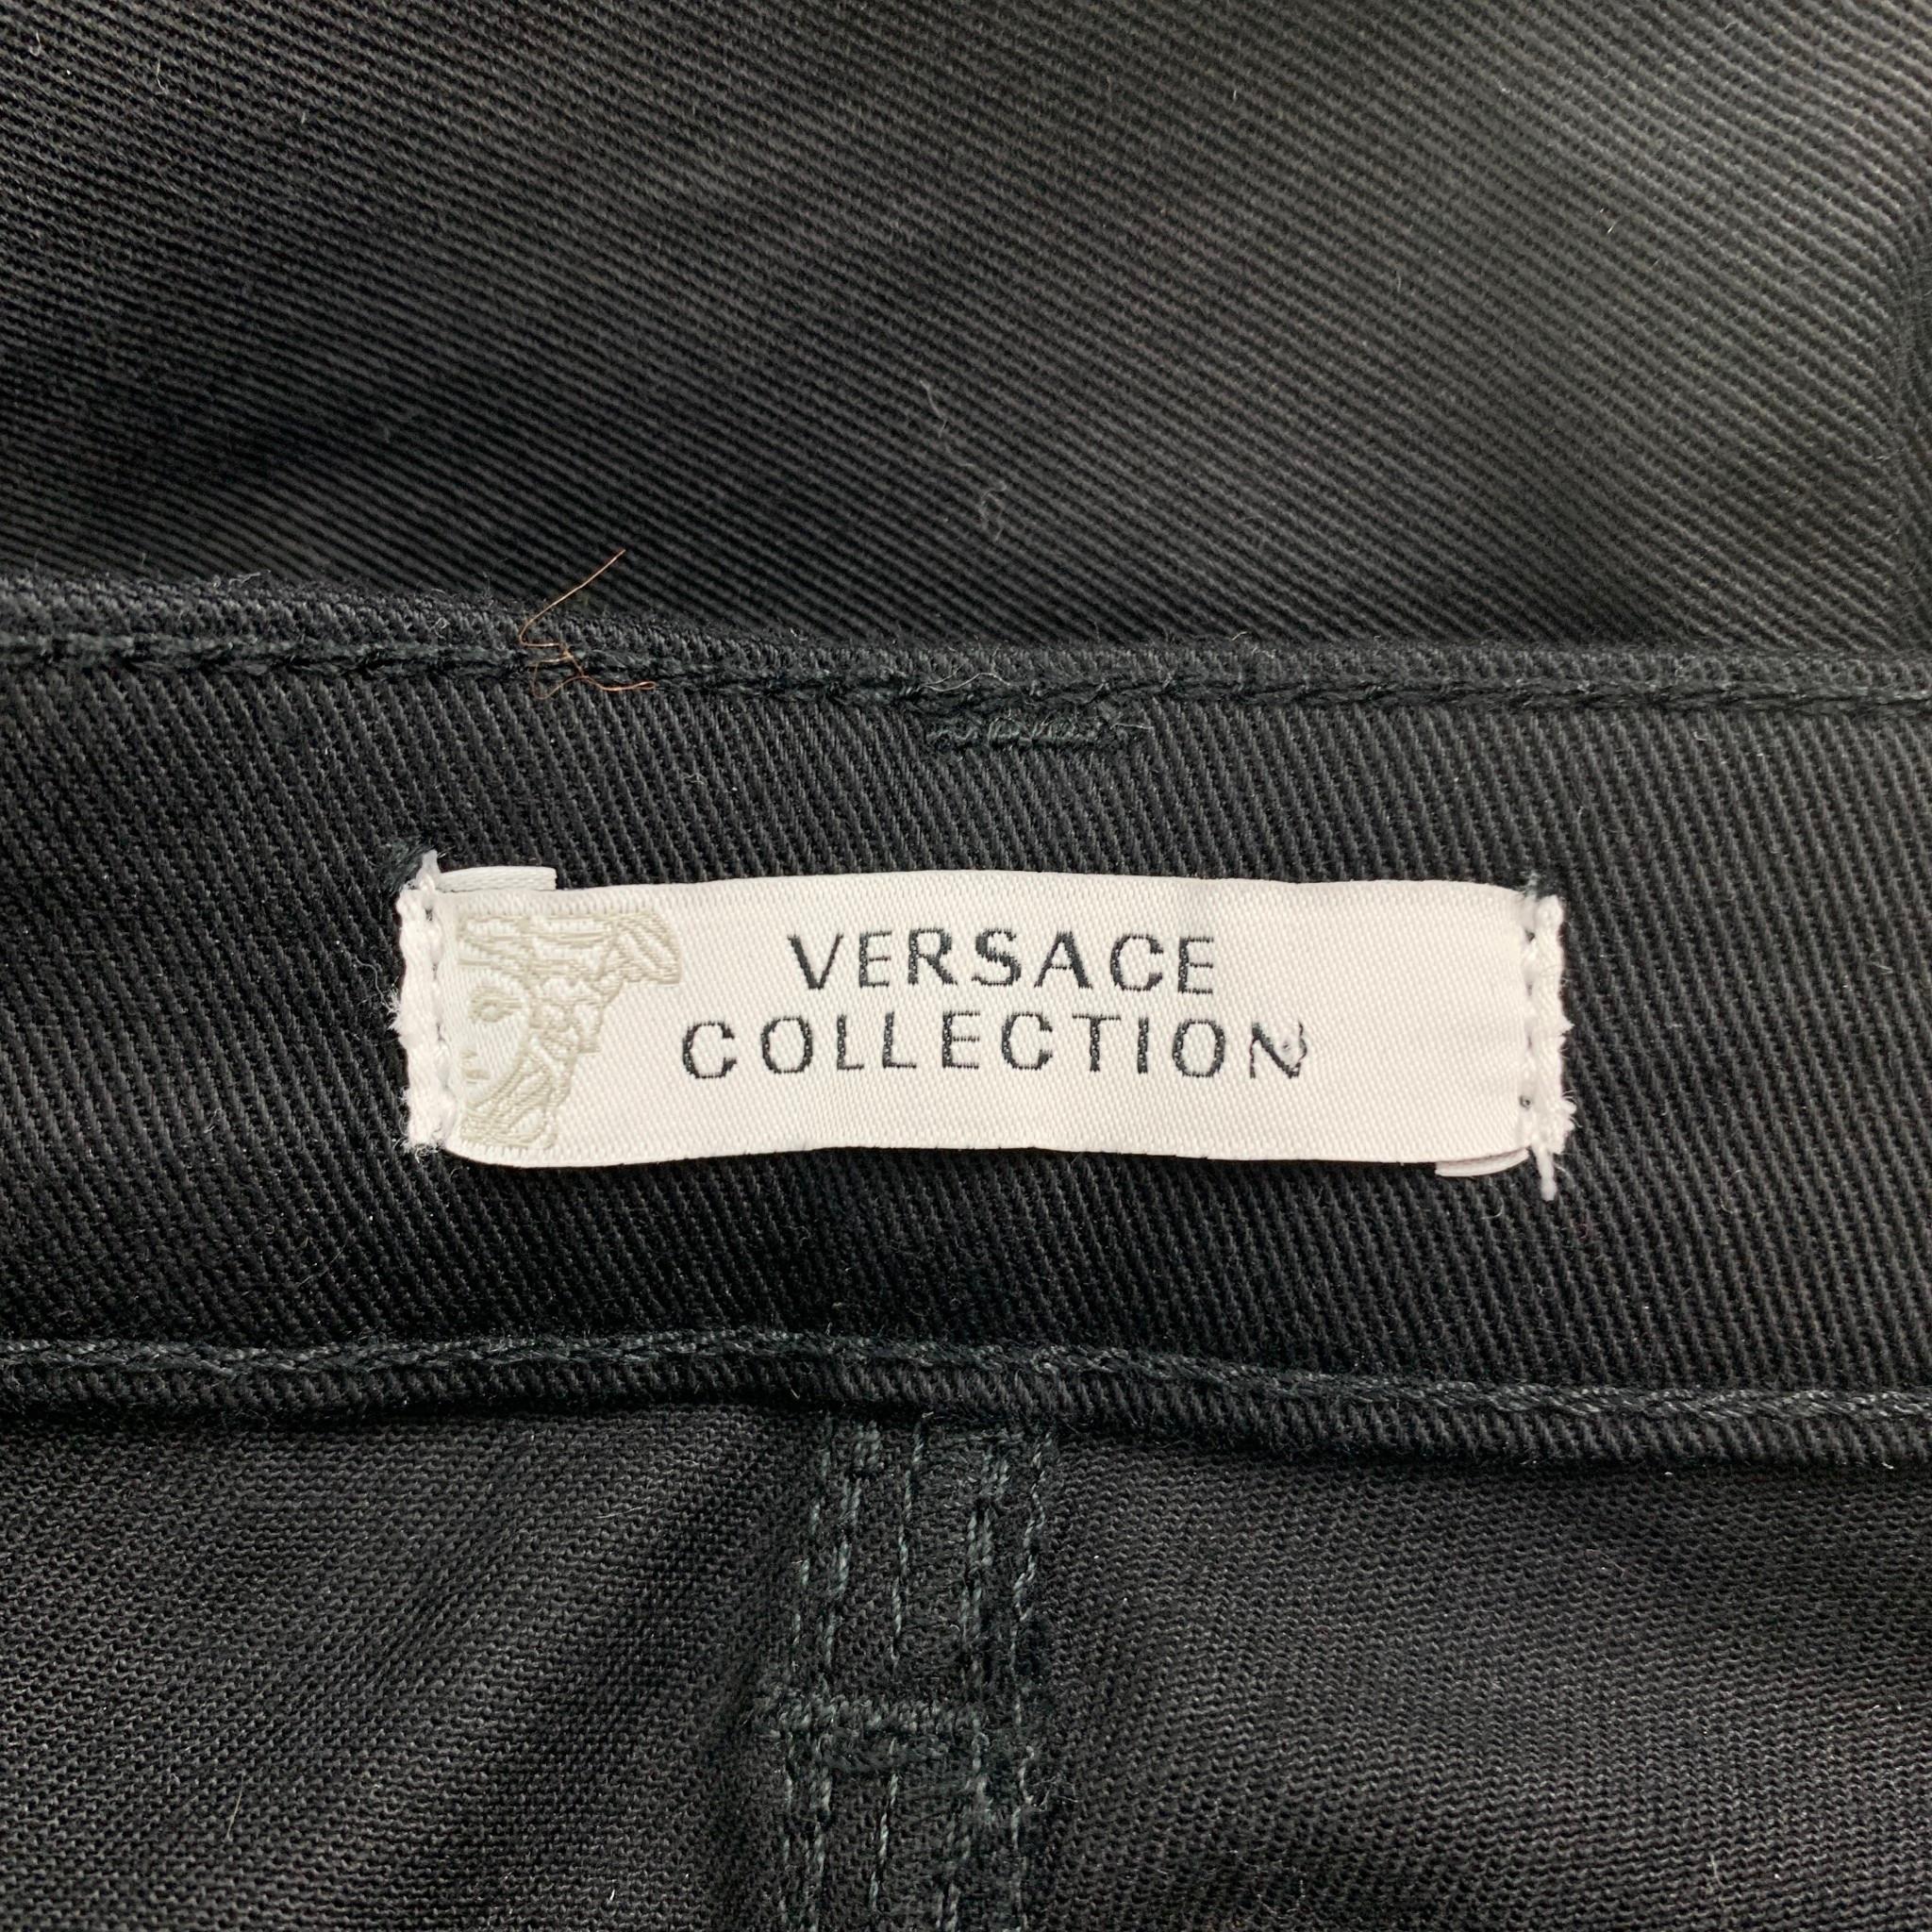 VERSACE COLLECTION Size 30 Black Cotton Blend Studded Skinny Casual Pants 1